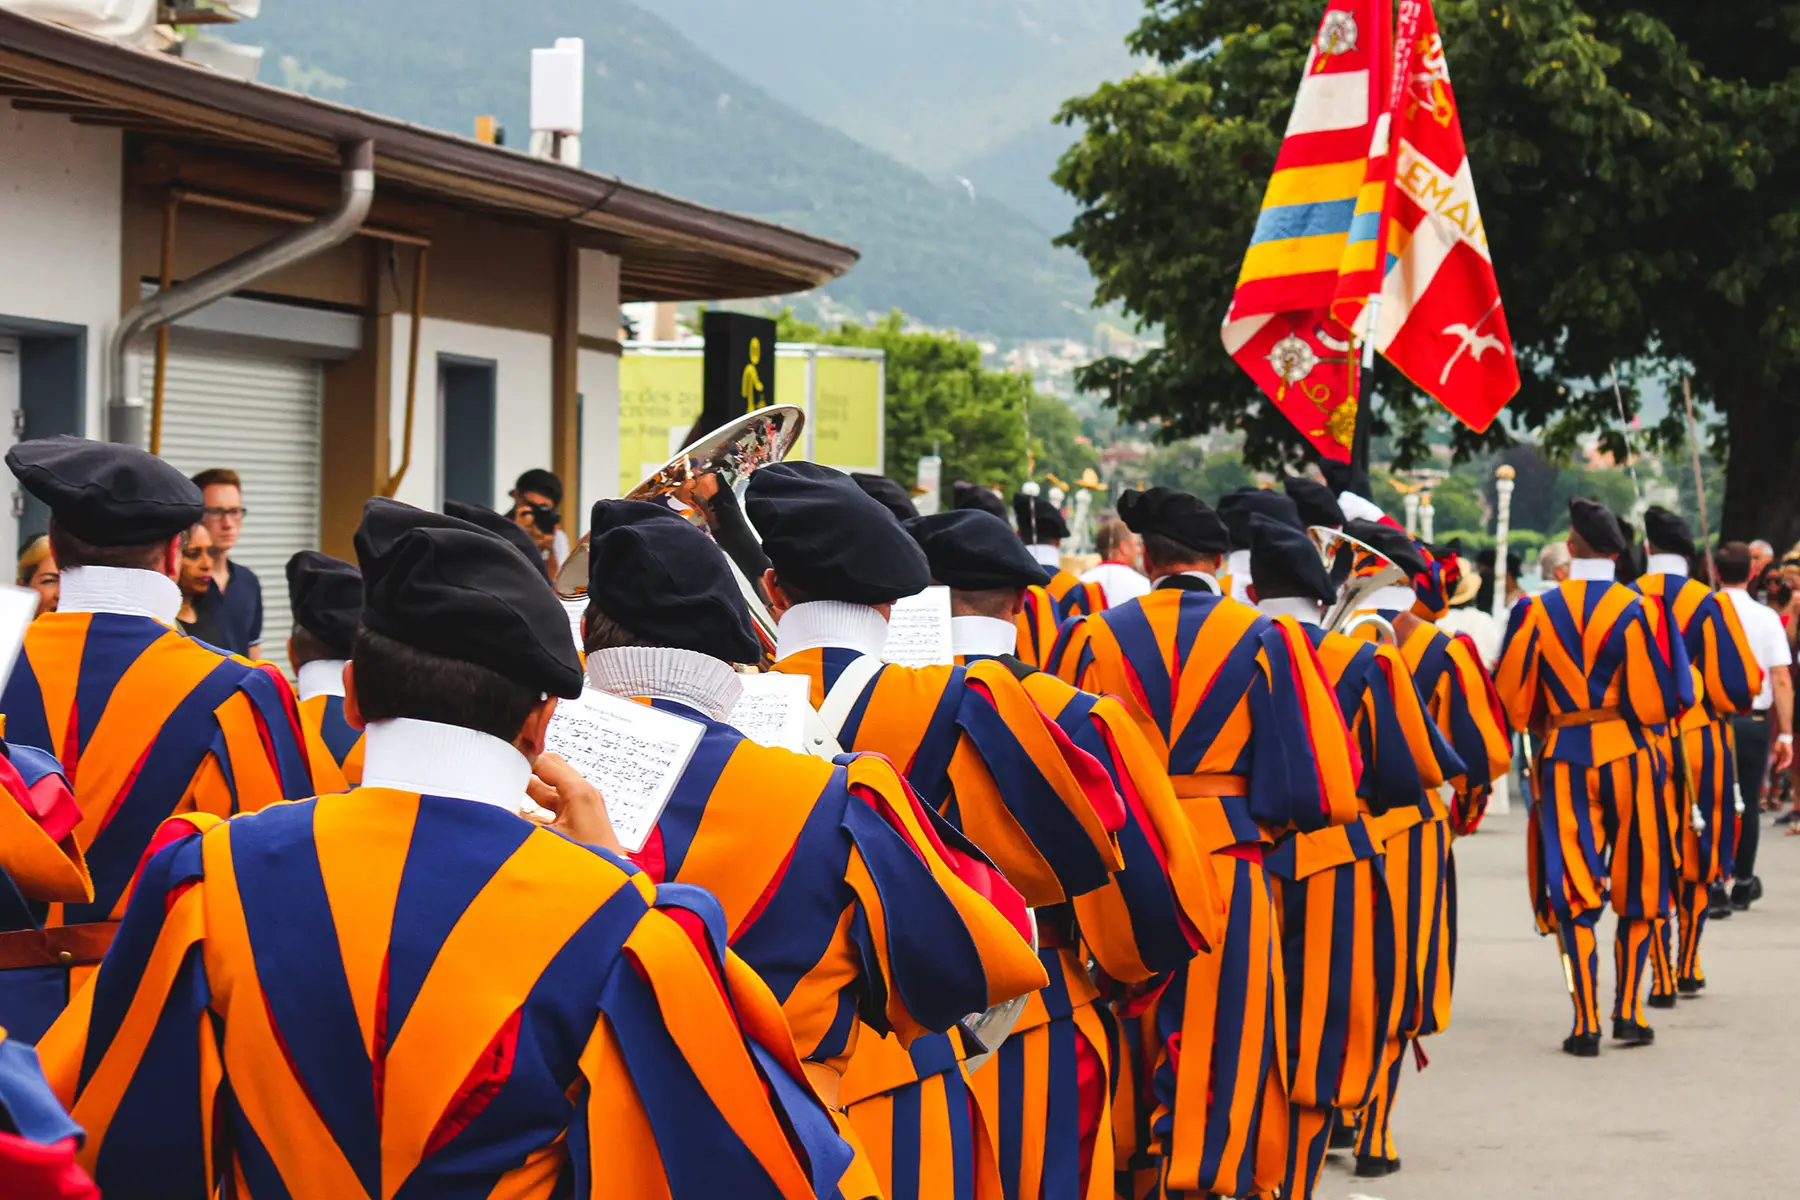 A colorful parade in Vevey on Swiss National Day